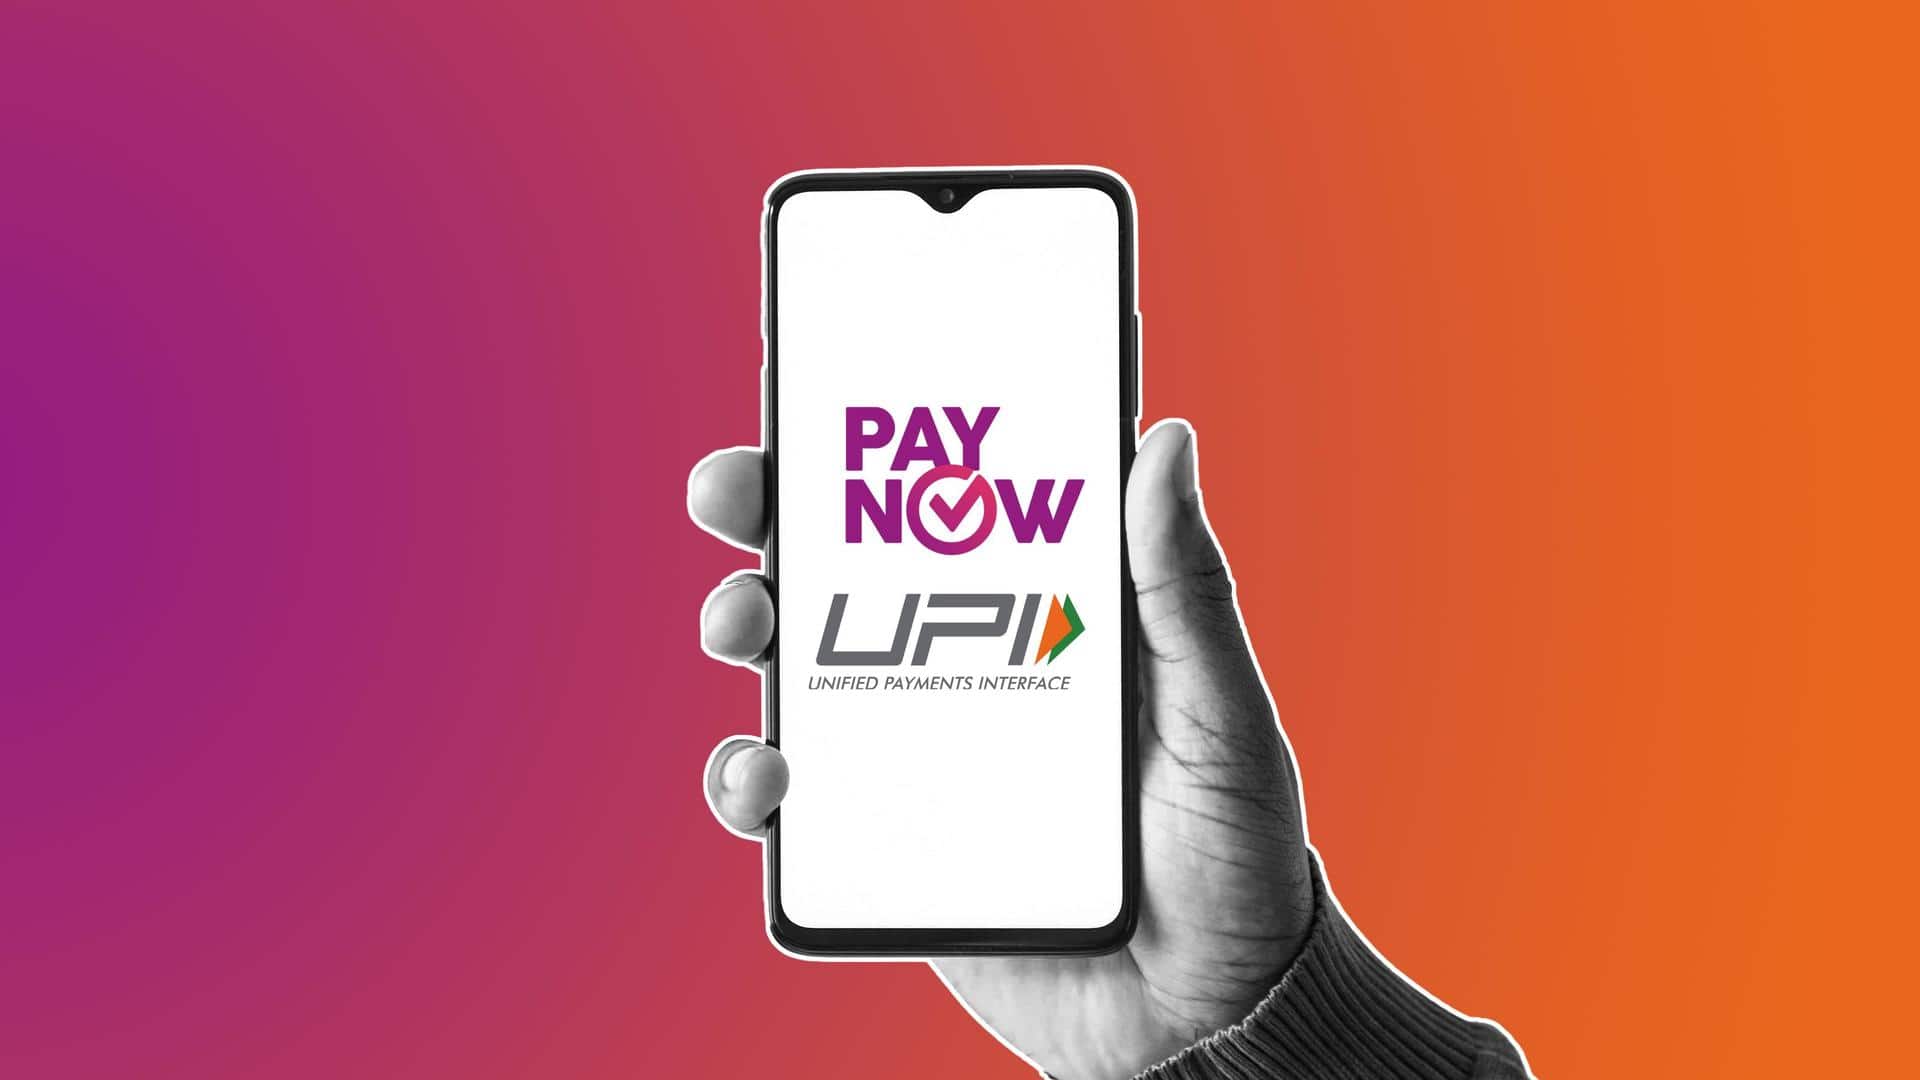 India's UPI makes global debut in partnership with Singapore's PayNow